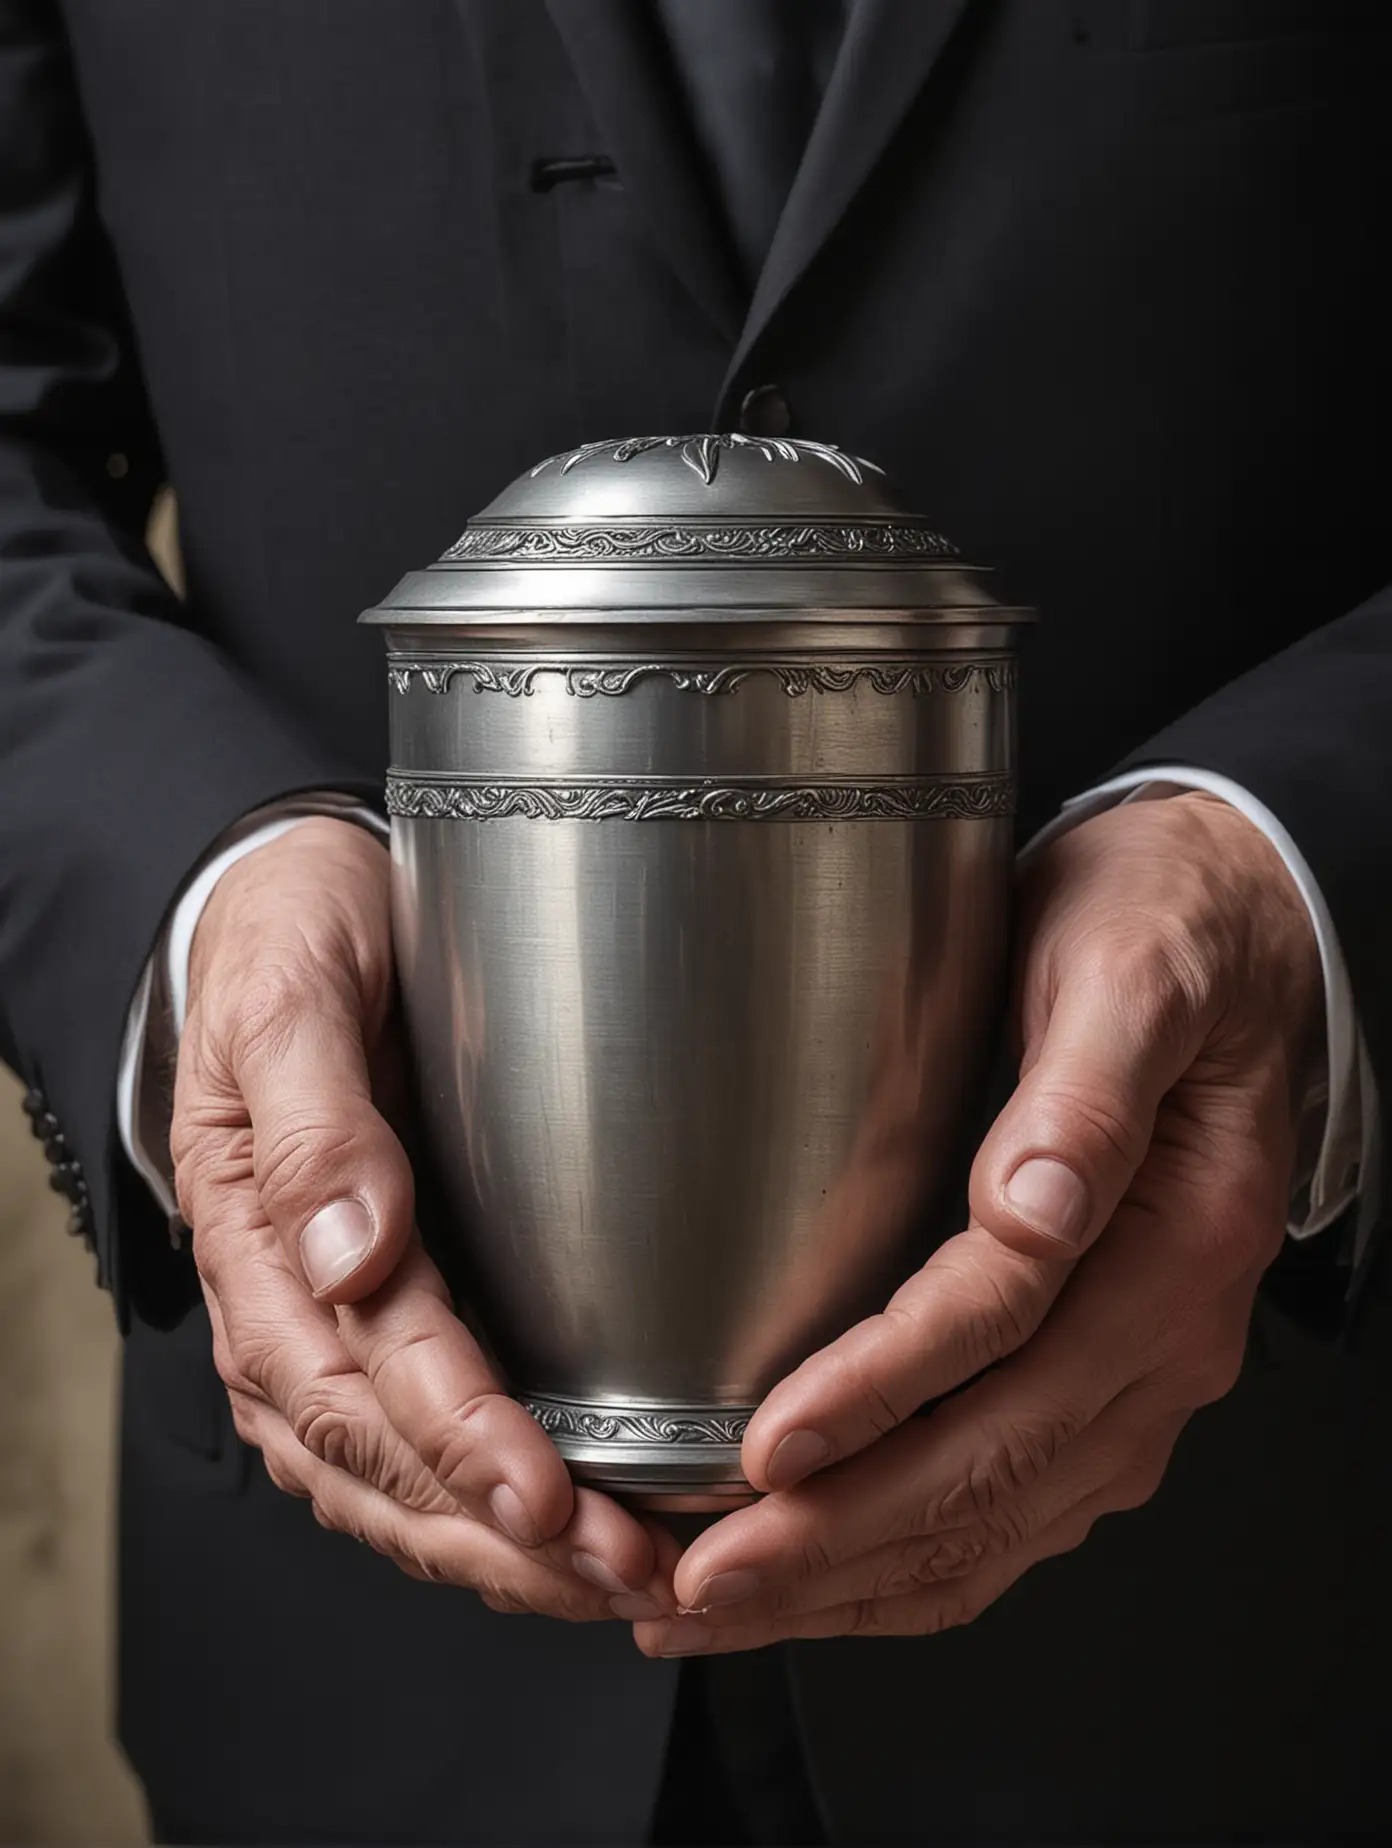 Man in Suit Holding Smooth Metal Funeral Urn